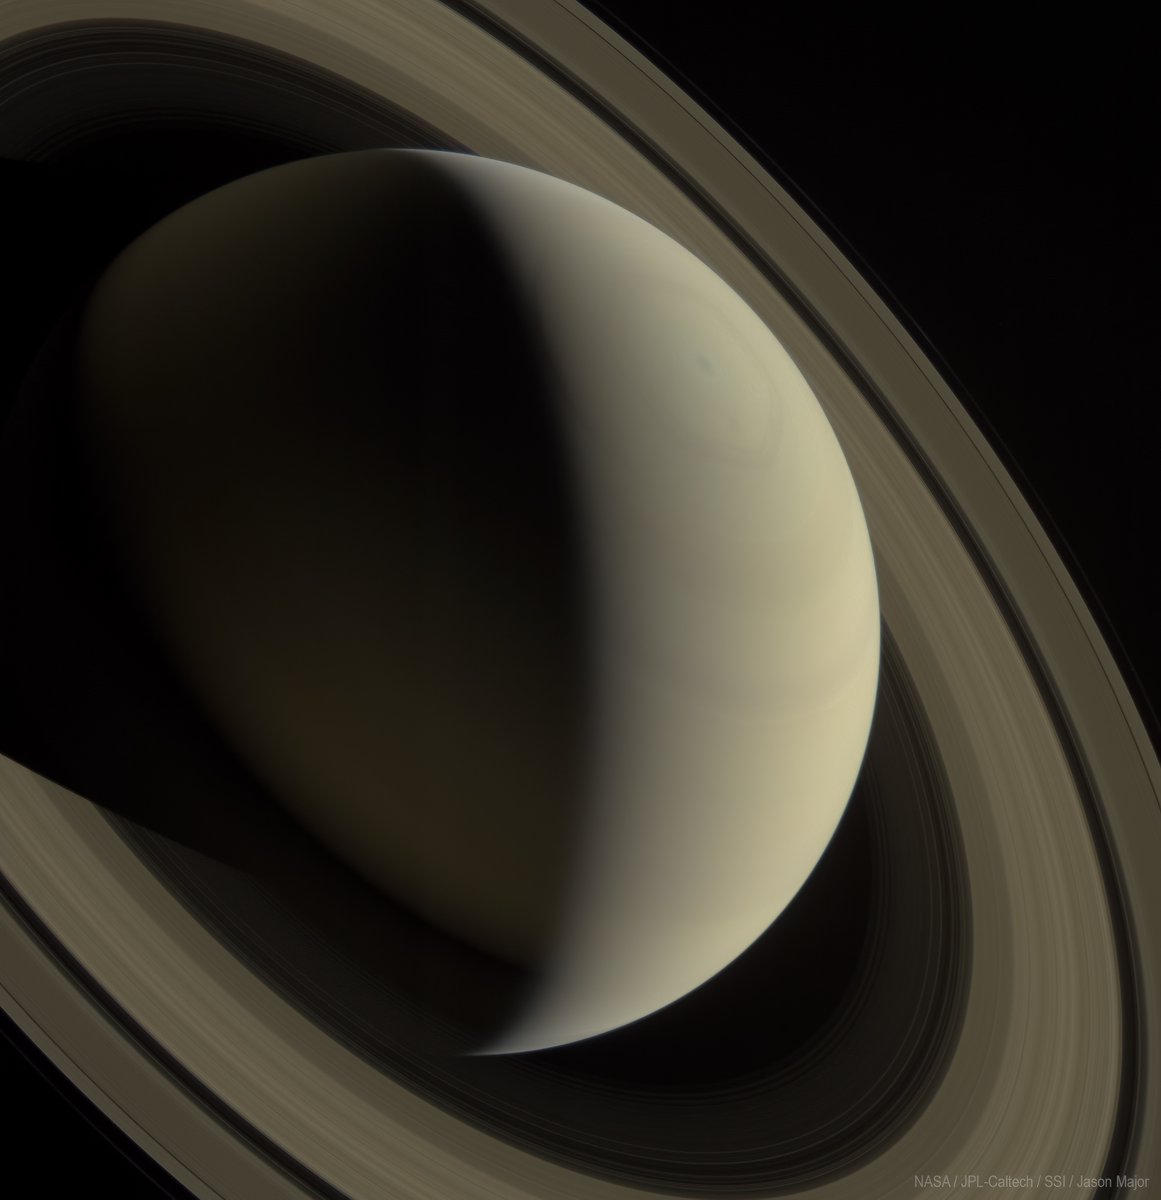 A view of Saturn's northern hemisphere made from images acquired by Cassini on March 17, 2014 #OTD from a distance of 2.5 million km. Saturn has an axial tilt of 26.7º relative to its orbital plane. Credit: @nasa @NASAJPL @Caltech @spacescienceins Cassini Imaging Team & @JPMajor